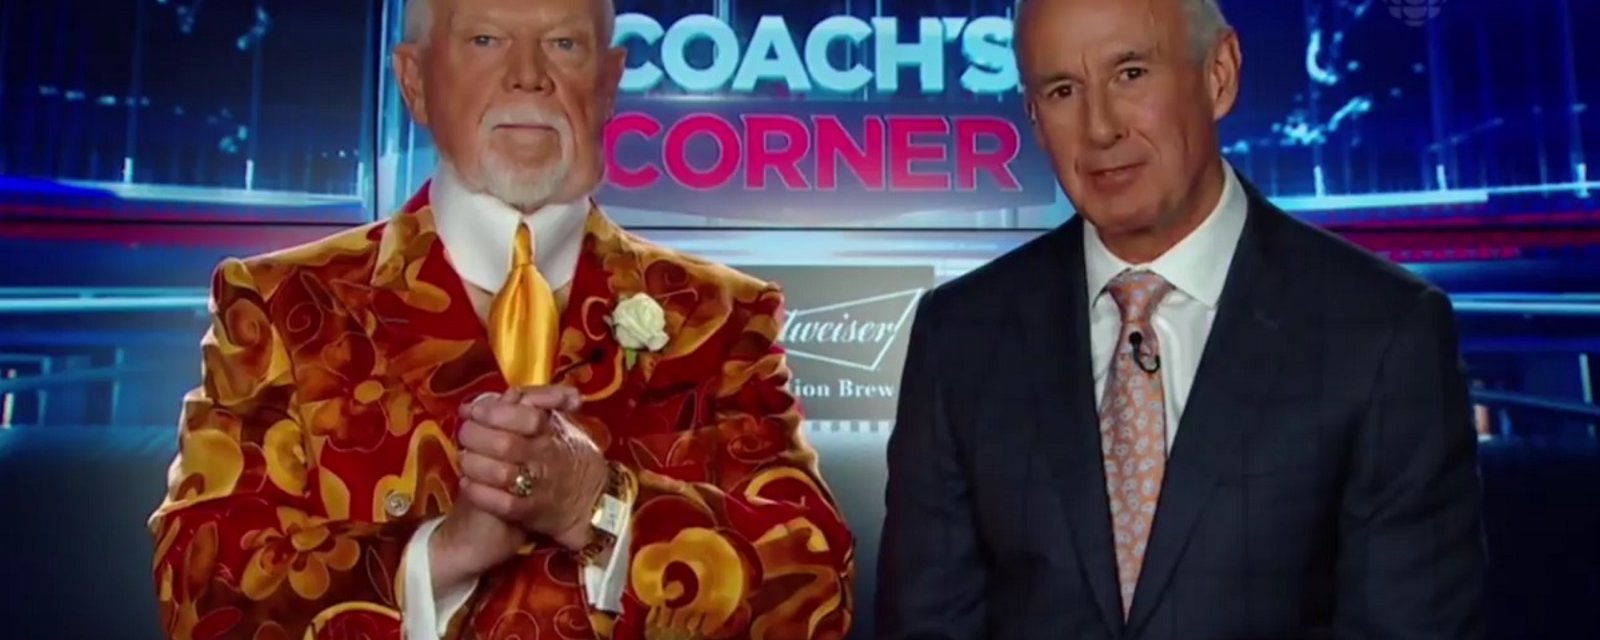 Don Cherry destroys Phil Kessel and rips “Americans” during Coach's Corner tonight!